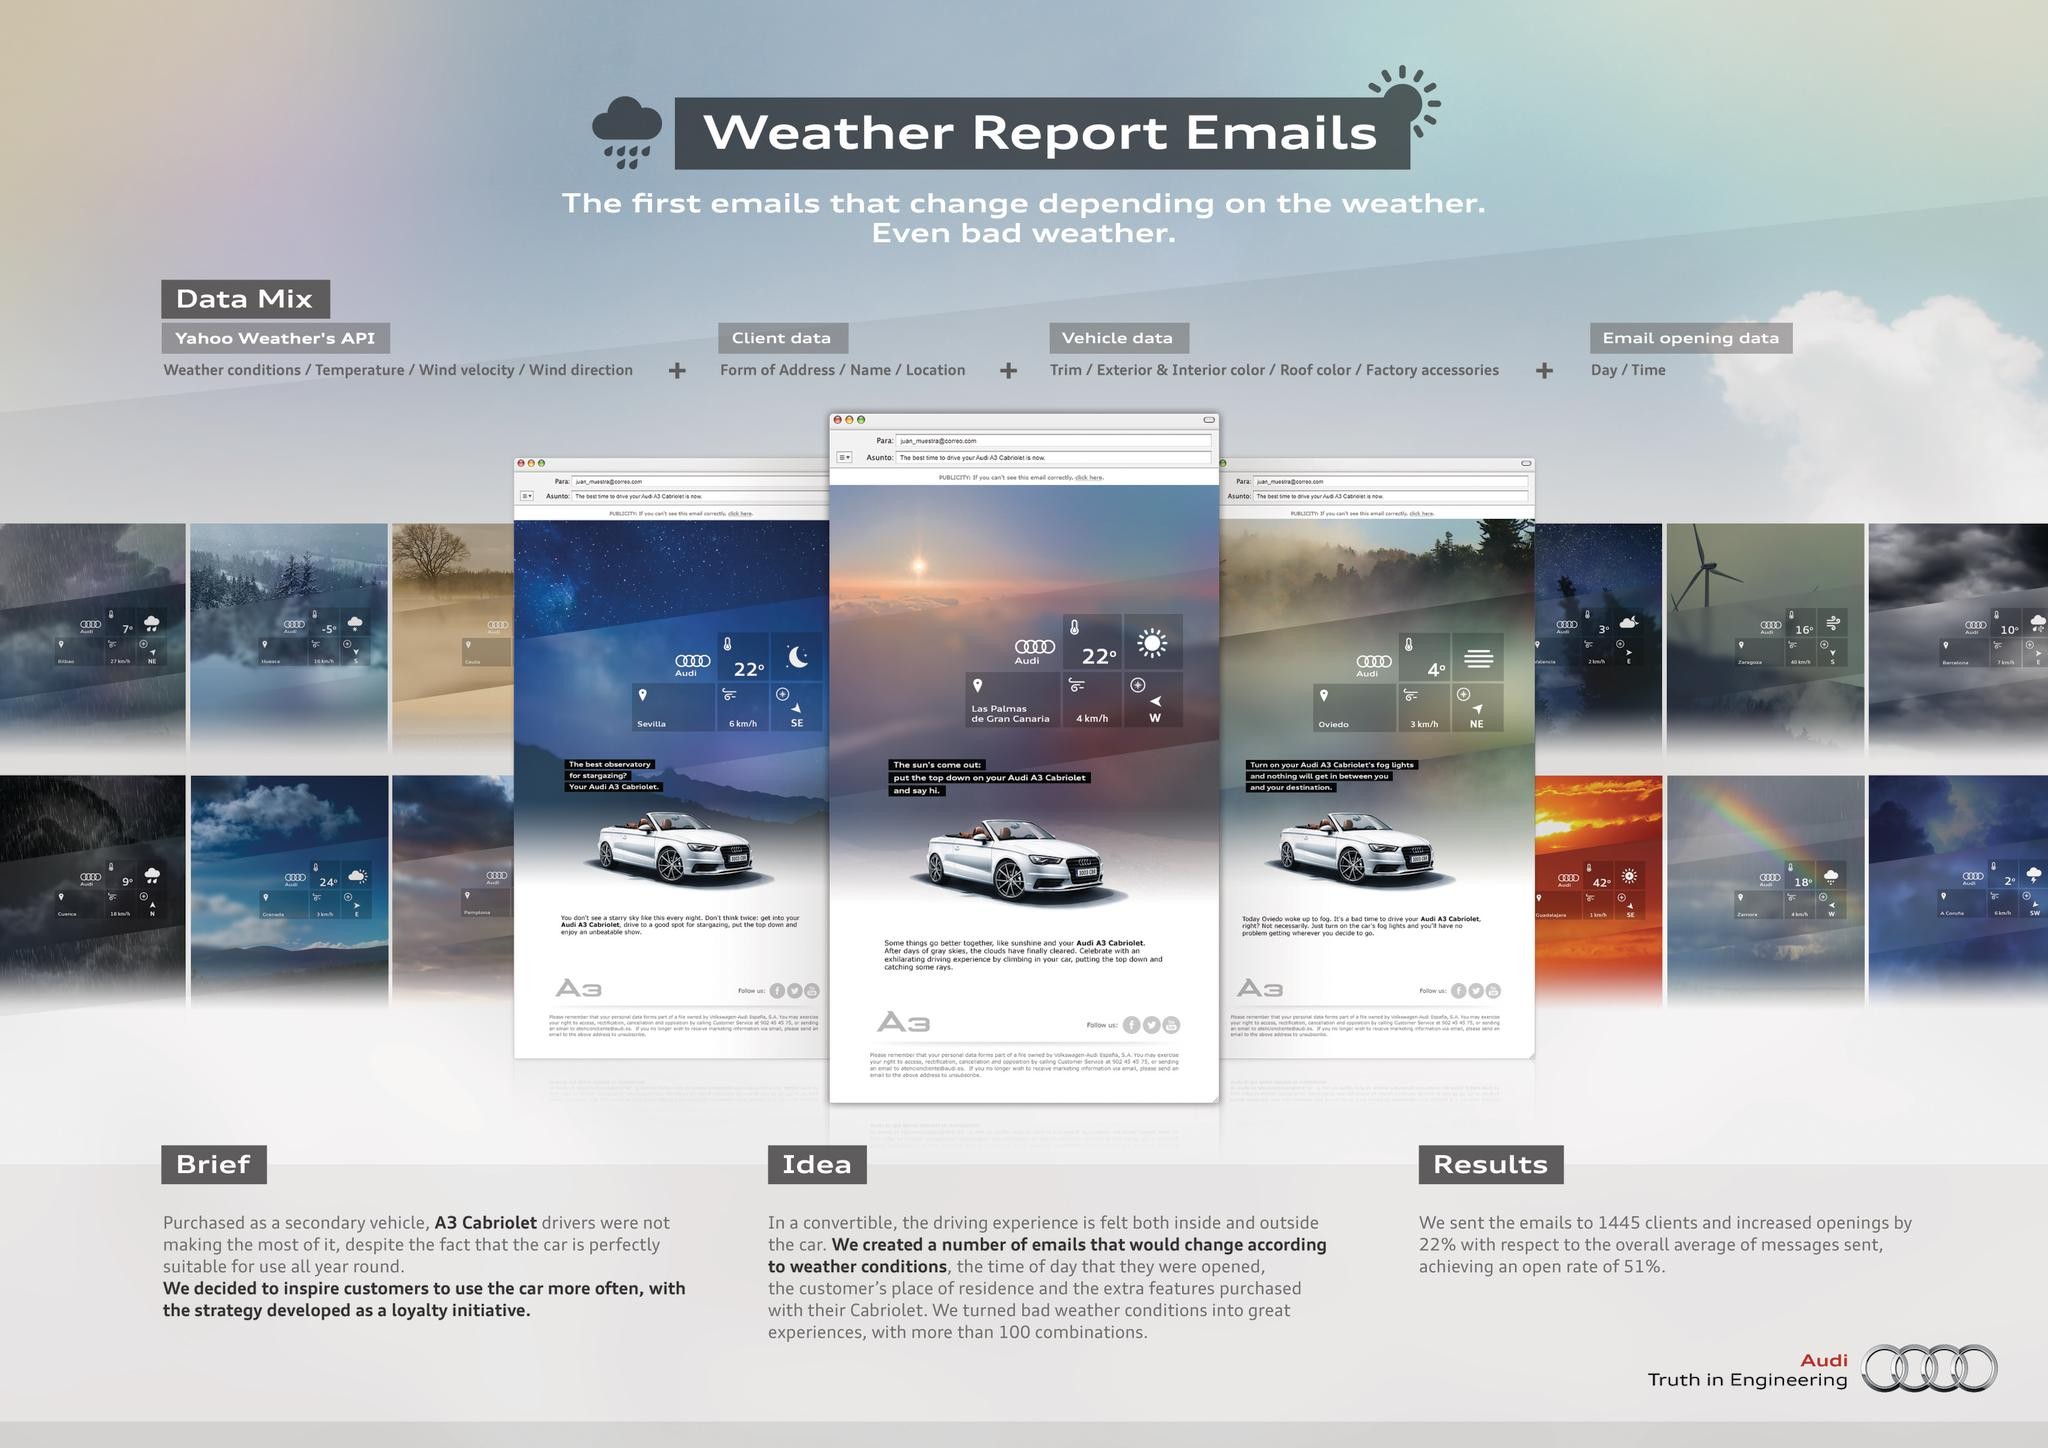 WEATHER REPORT EMAILS